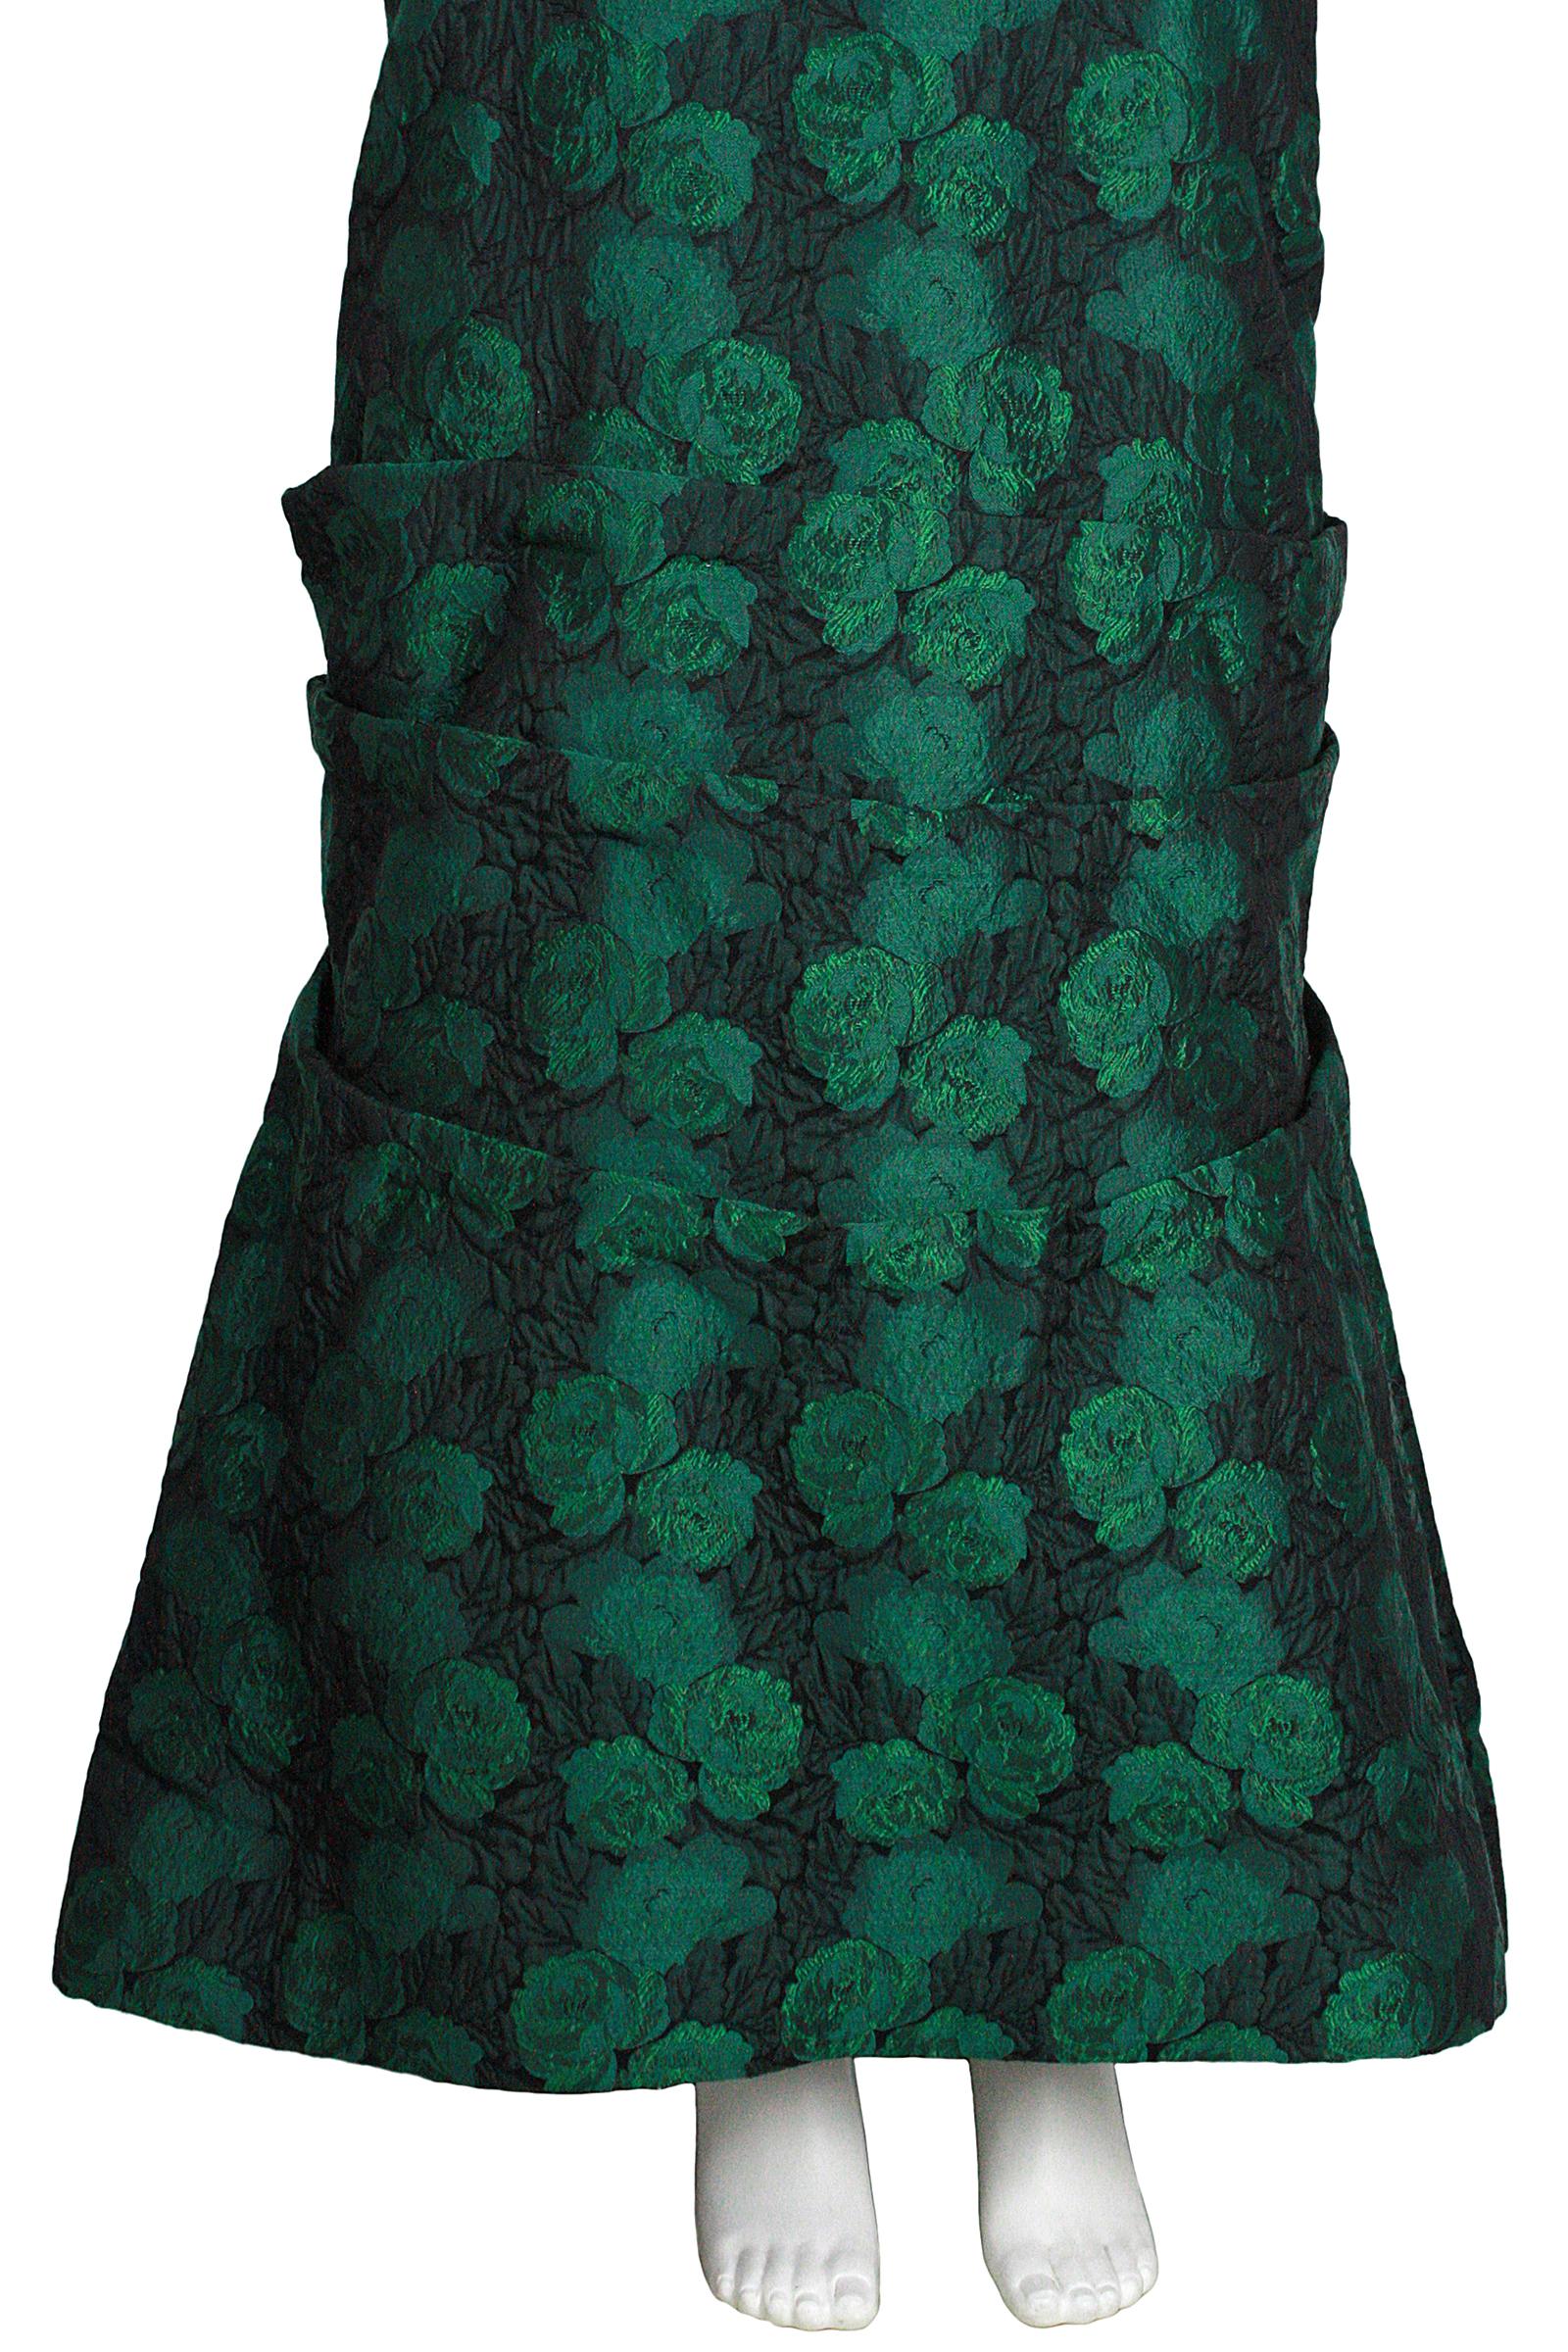 1980s Scaasi Off The Shoulder Green & Black Floral Brocade Gown with Jacket For Sale 1